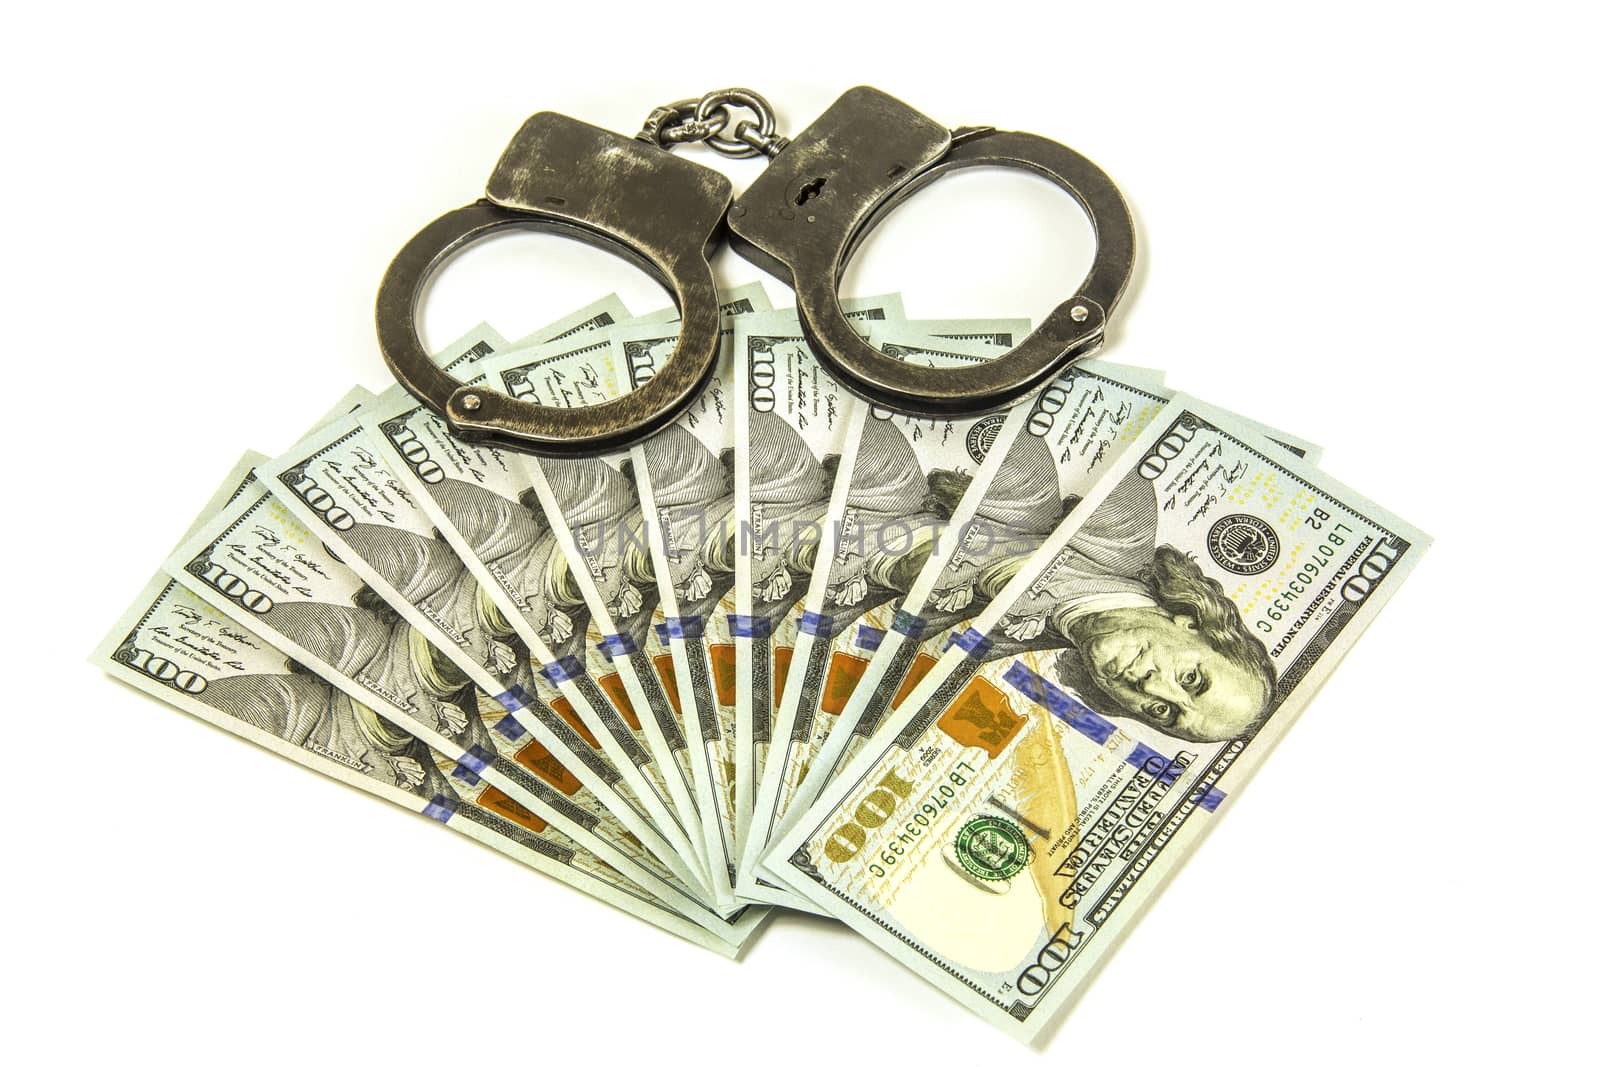 American dollars and metal handcuffs

